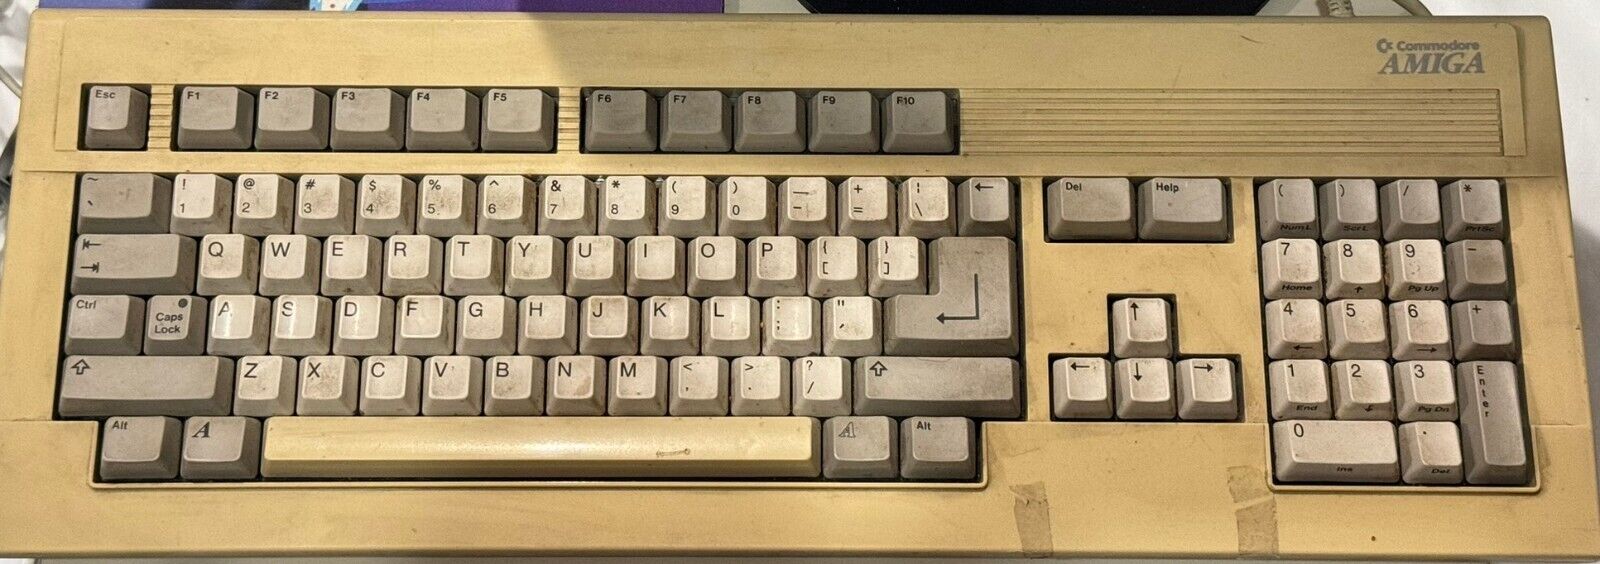 Commodore Amiga 2000/3000 Keyboard - Has Issues/For Parts